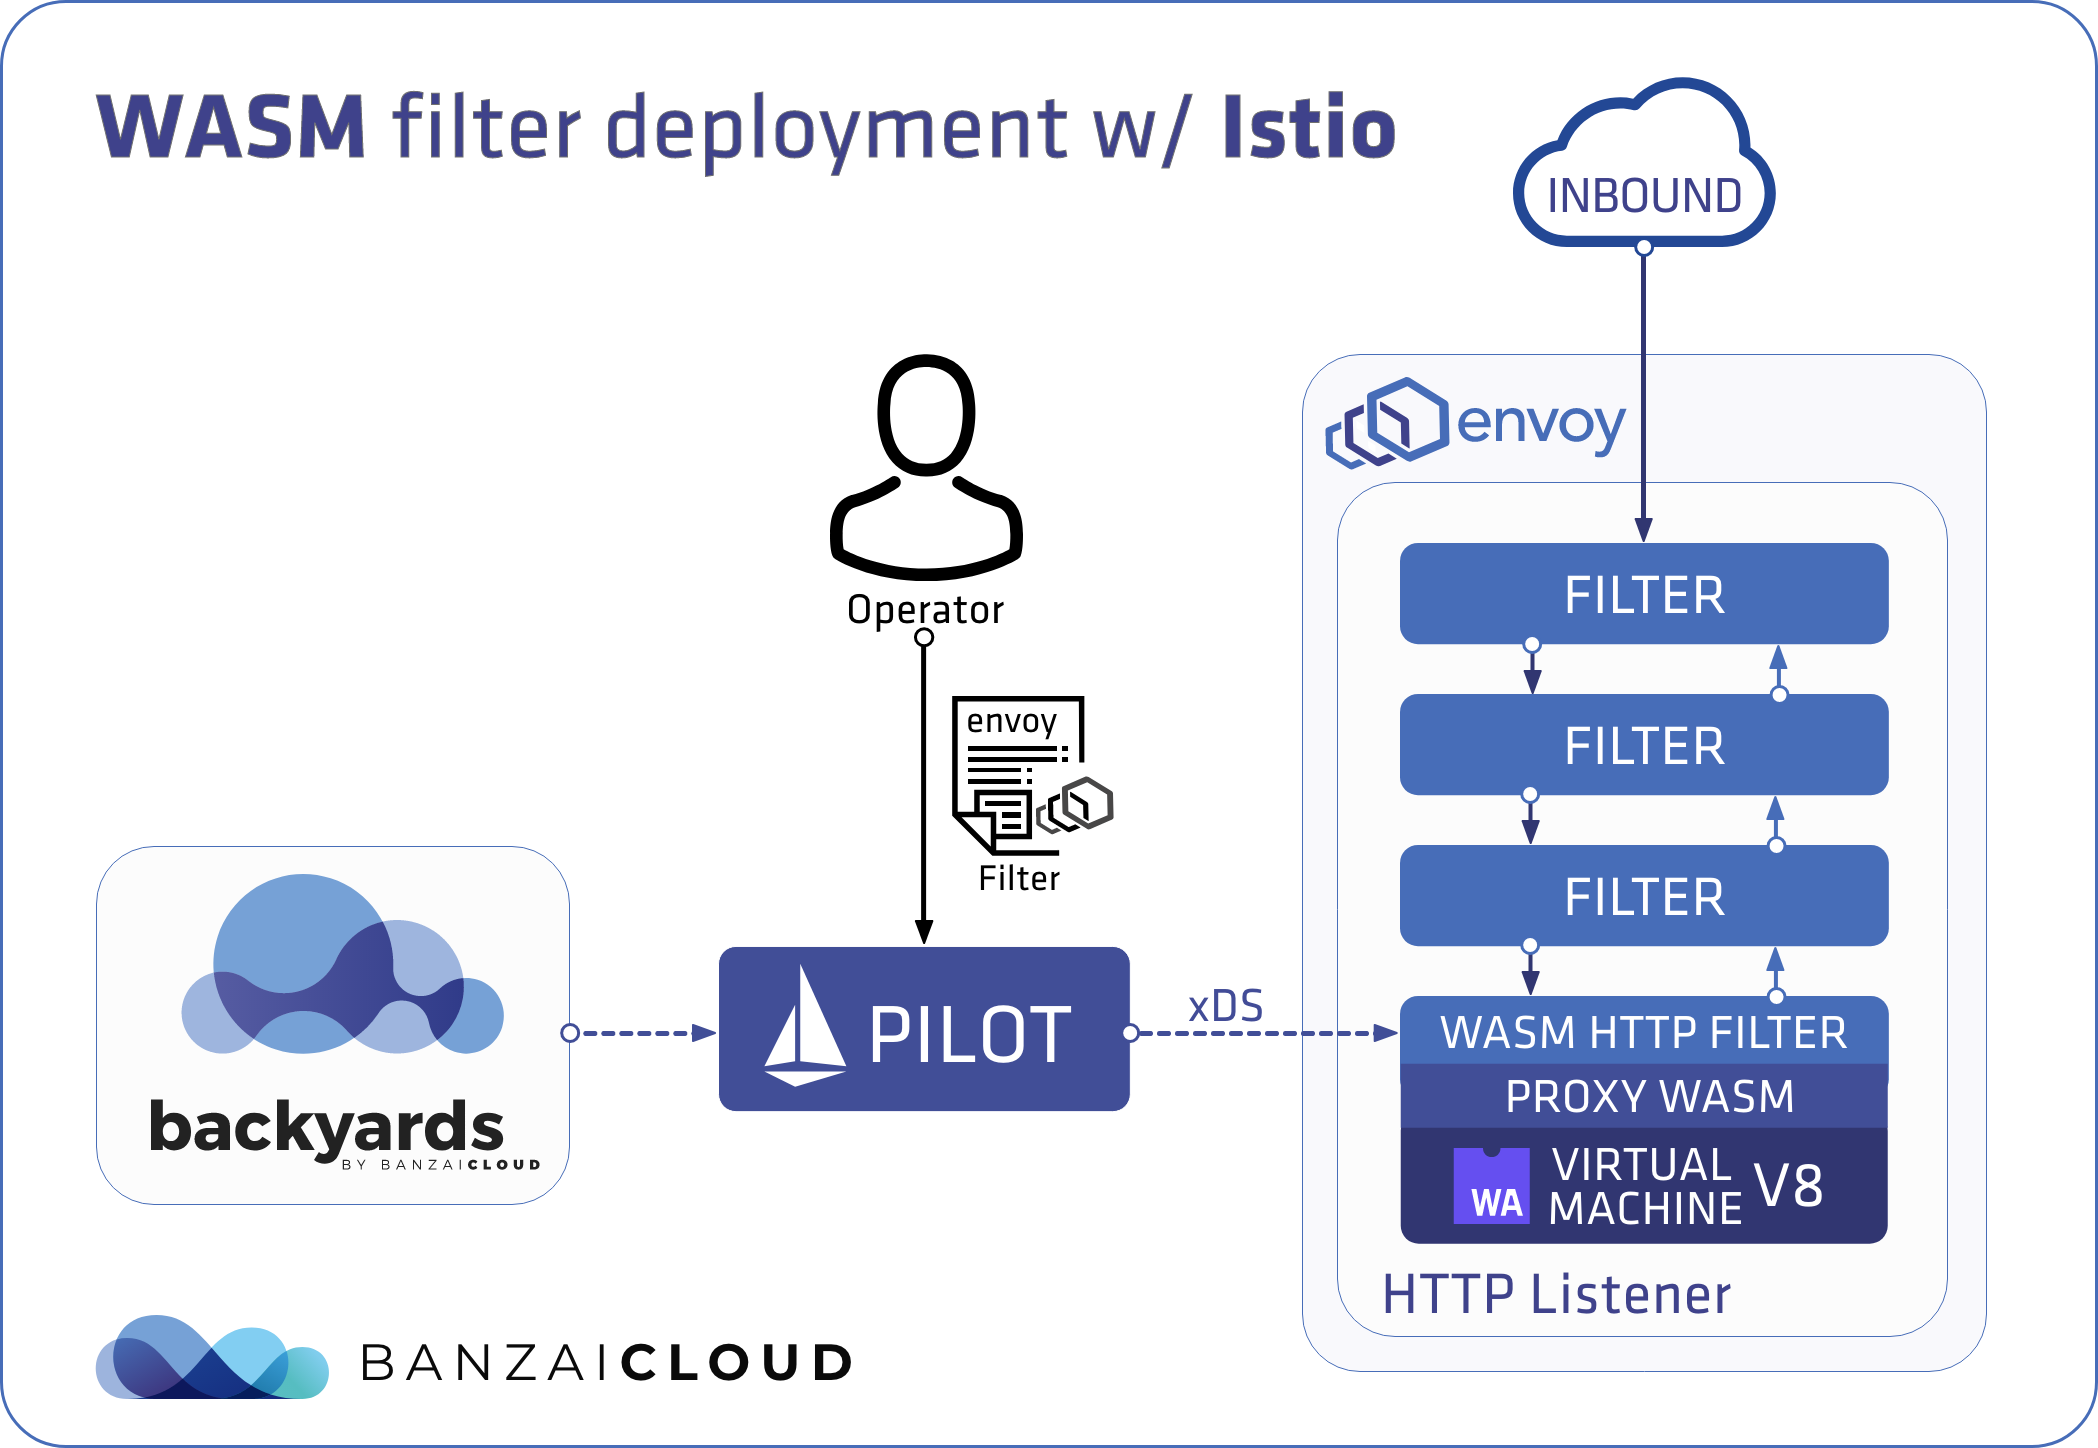 WASM filter deployment with Istio